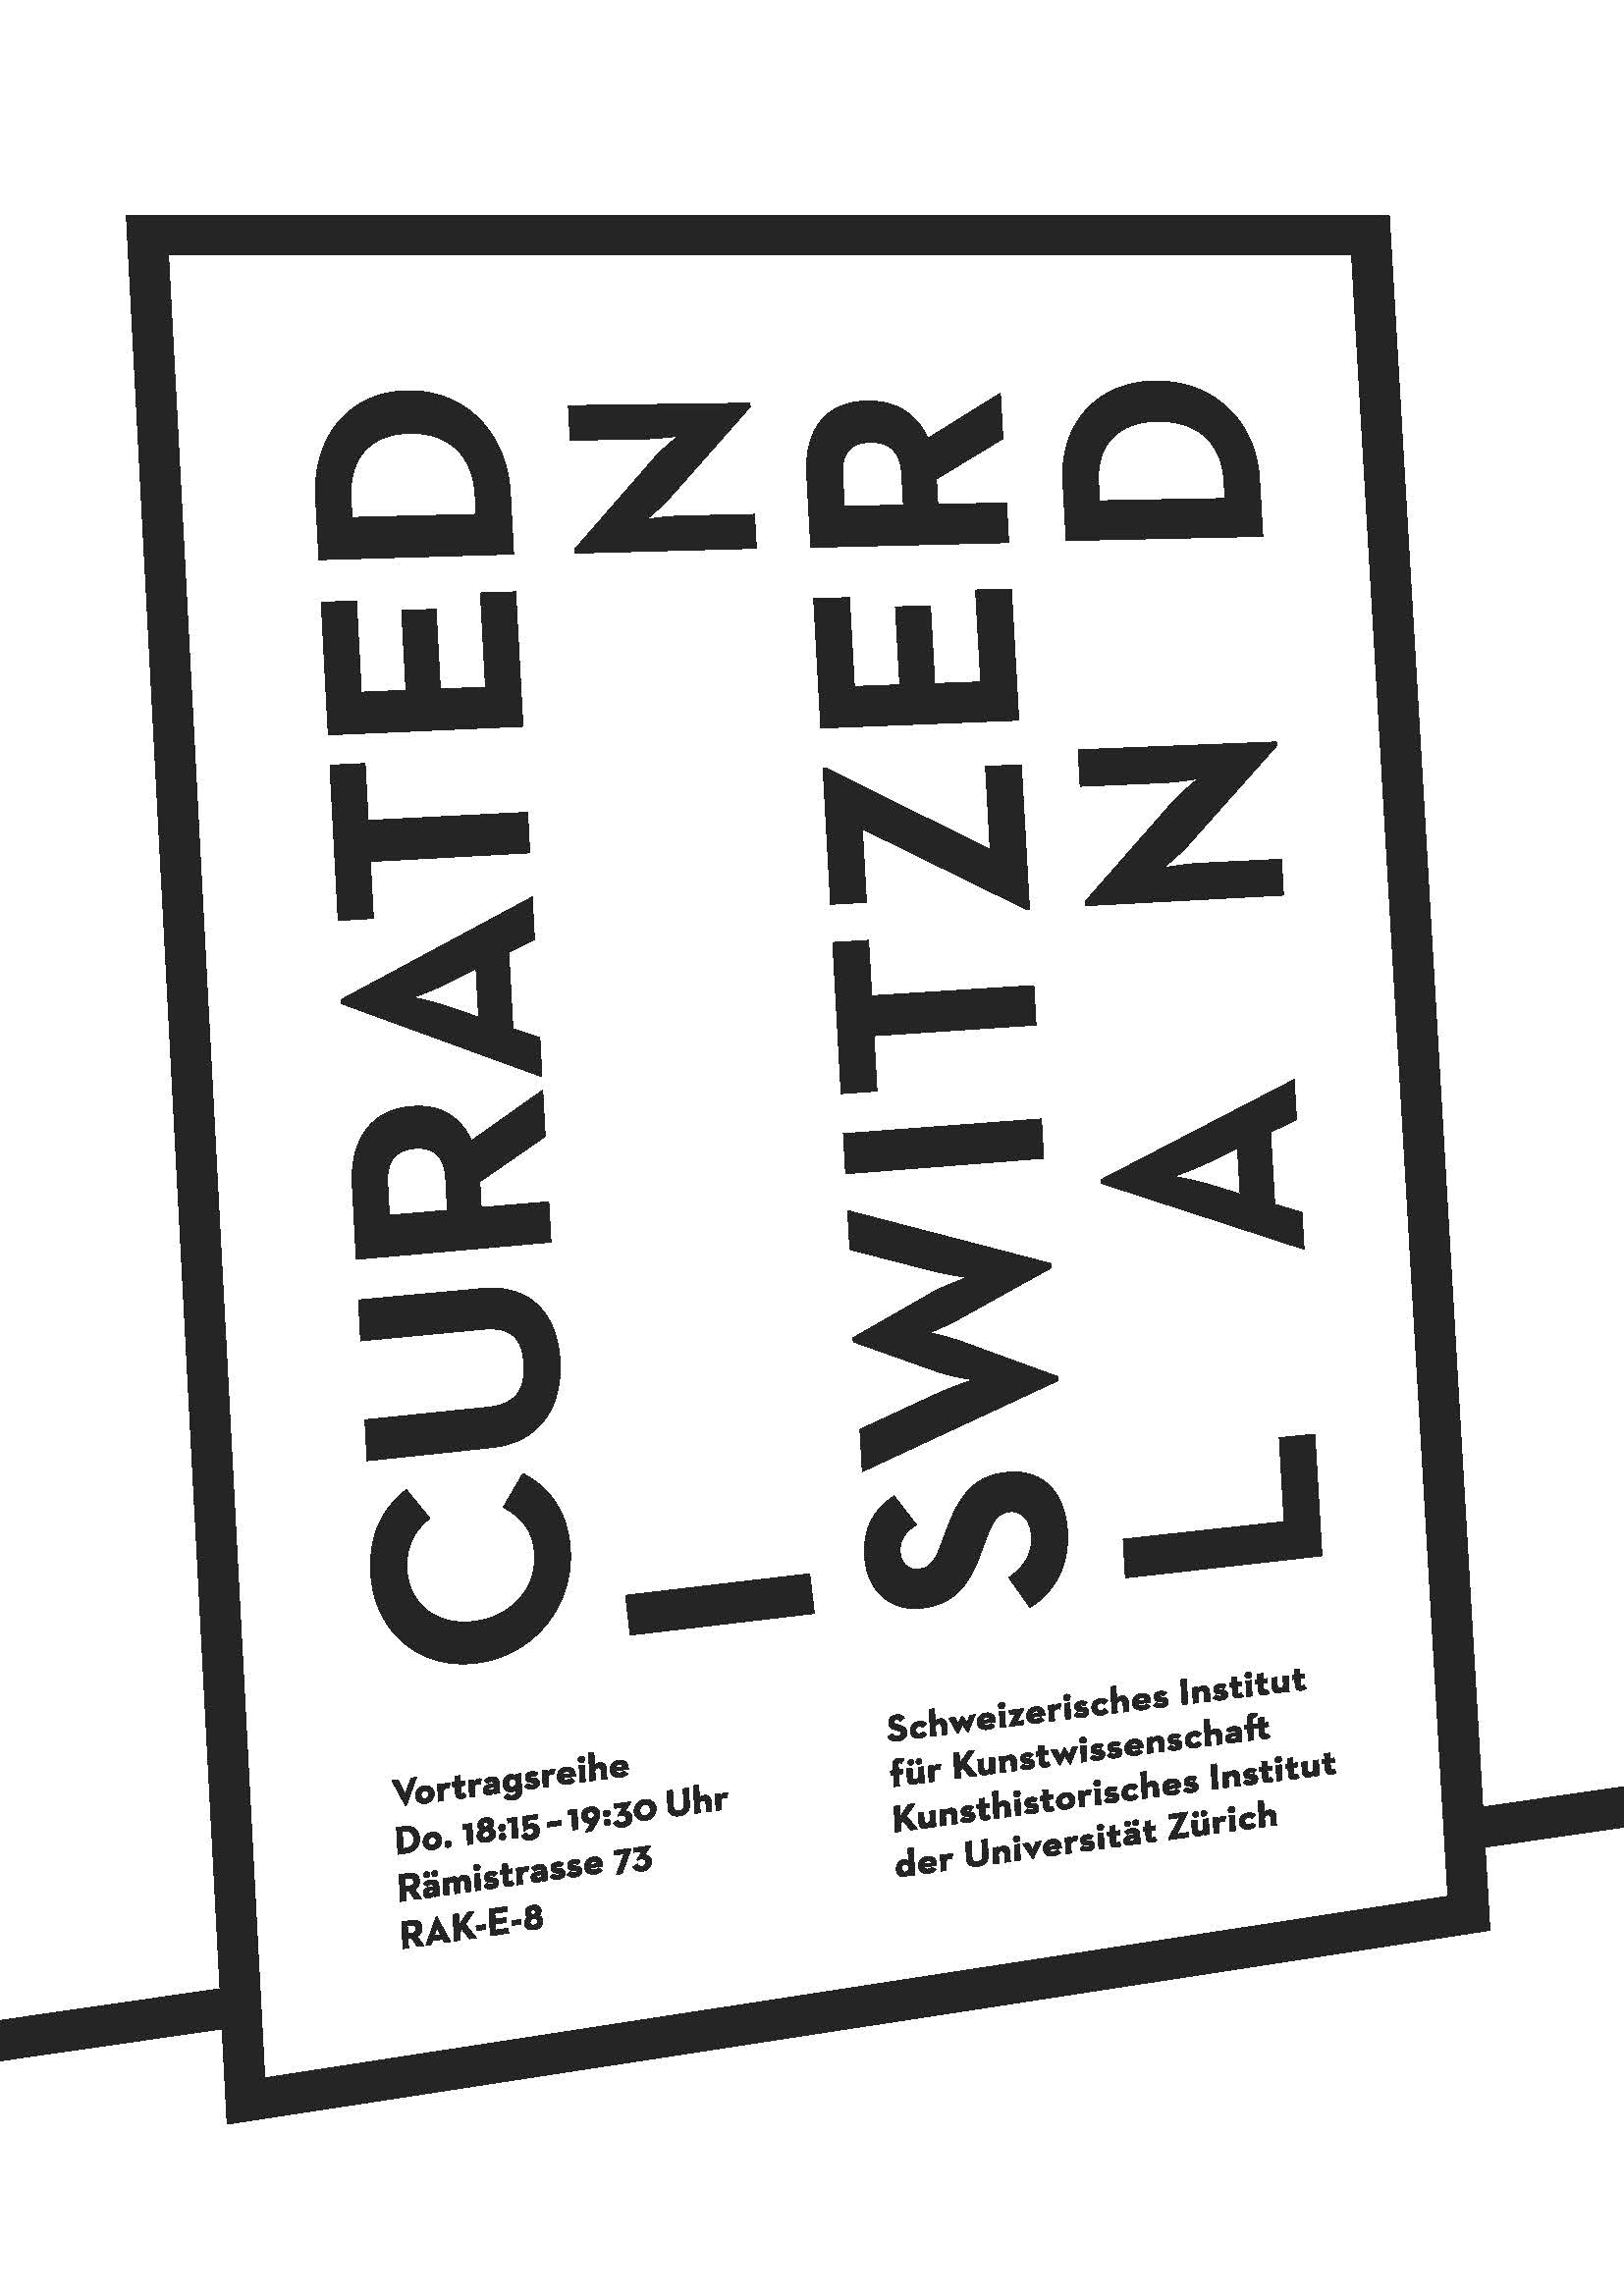 Curated in Switzerland